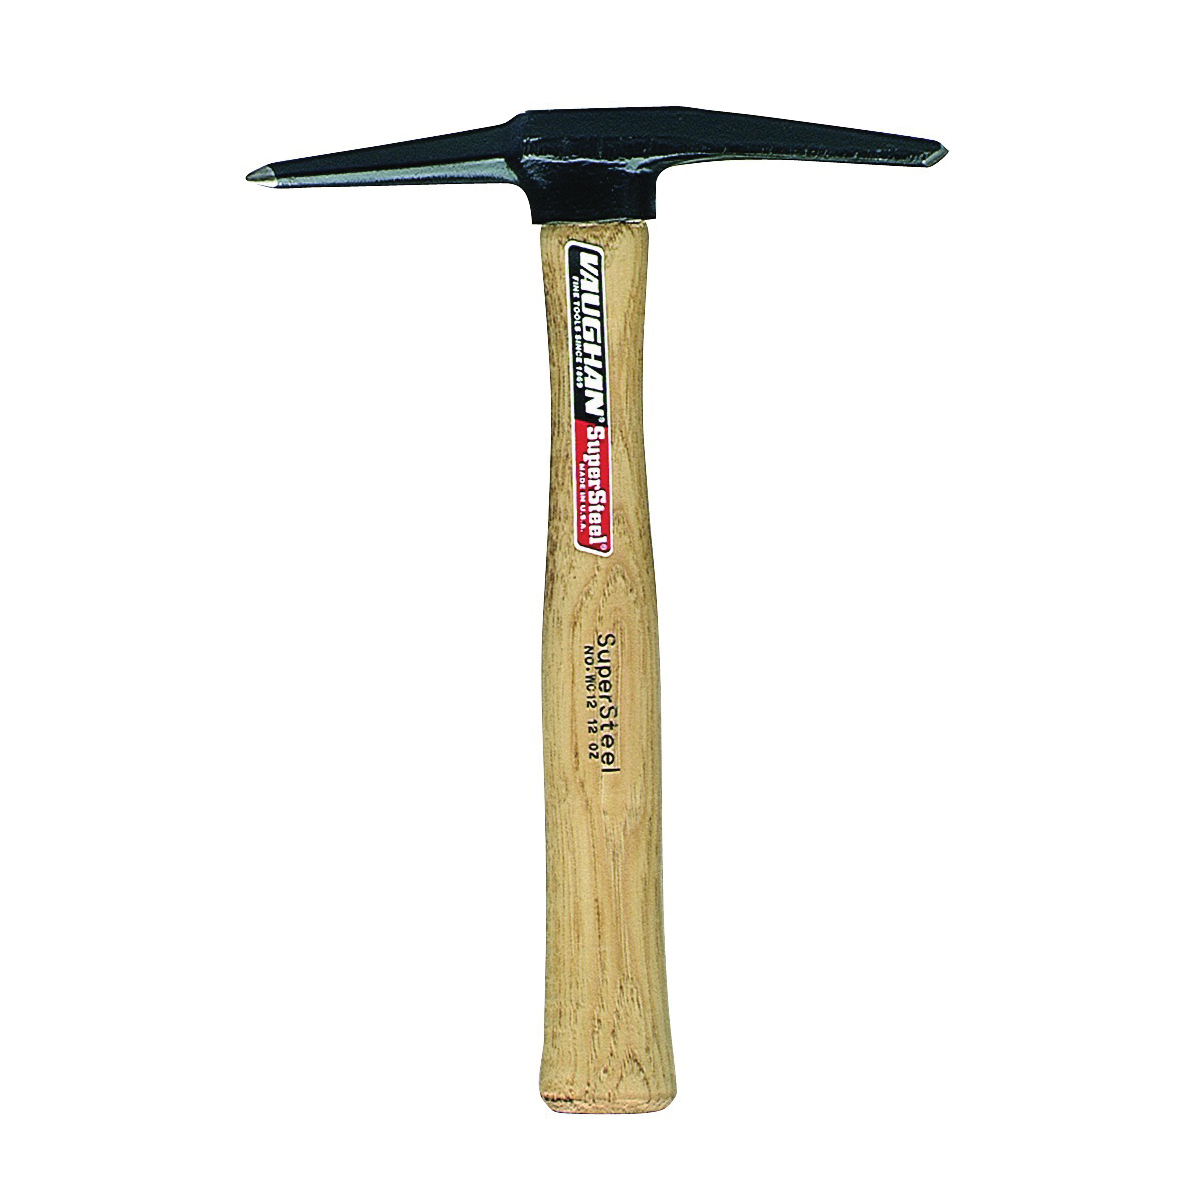 WC12 Welder Chipping Hammer, 13-1/4 in OAL, Wood Handle